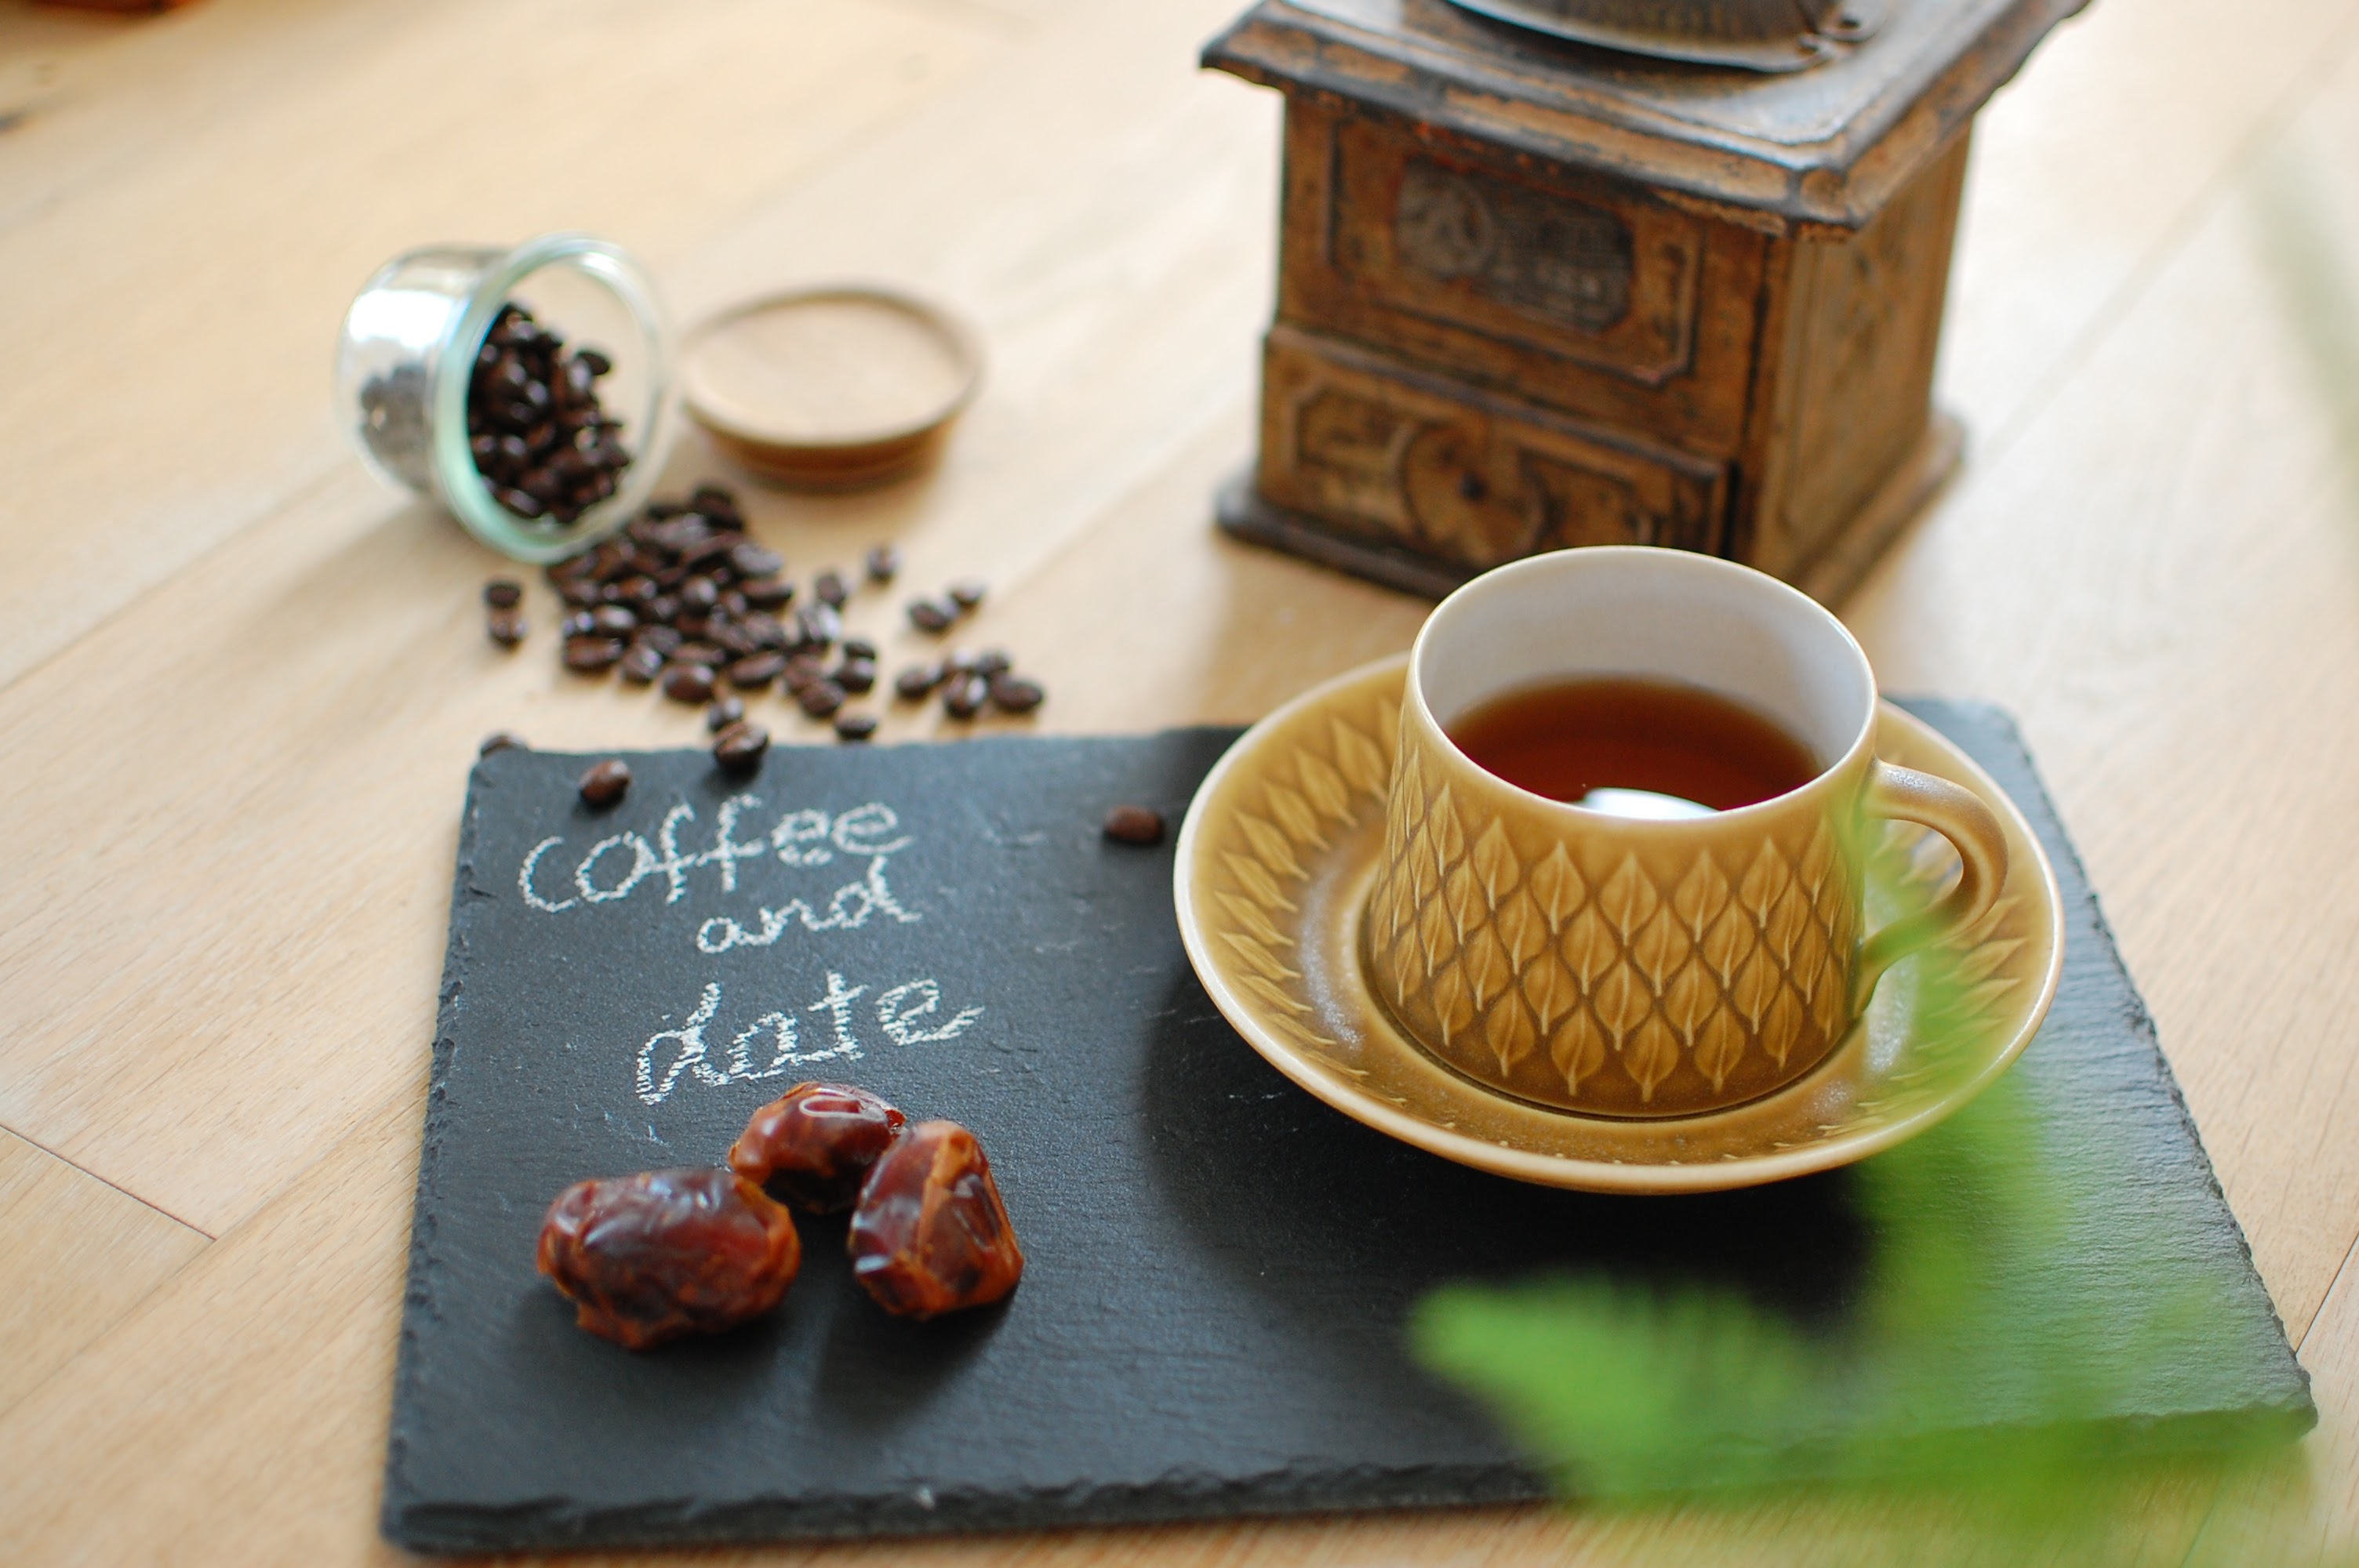 Coffee and Date　切っても切り離せない、人生のパートナー！